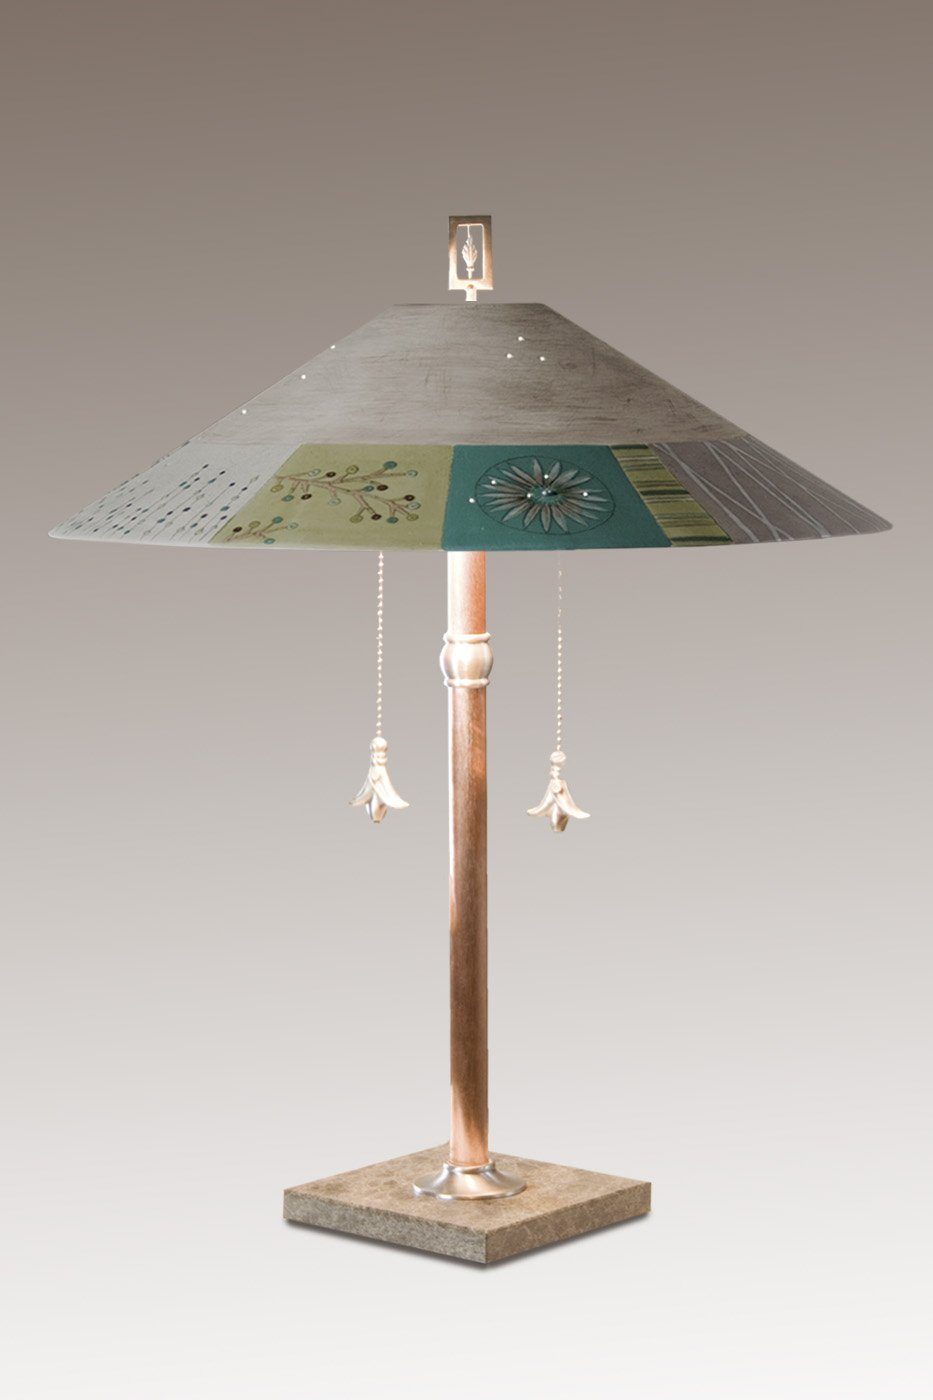 Copper Table Lamp with Large Wide Conical Ceramic Shade in Modern Field